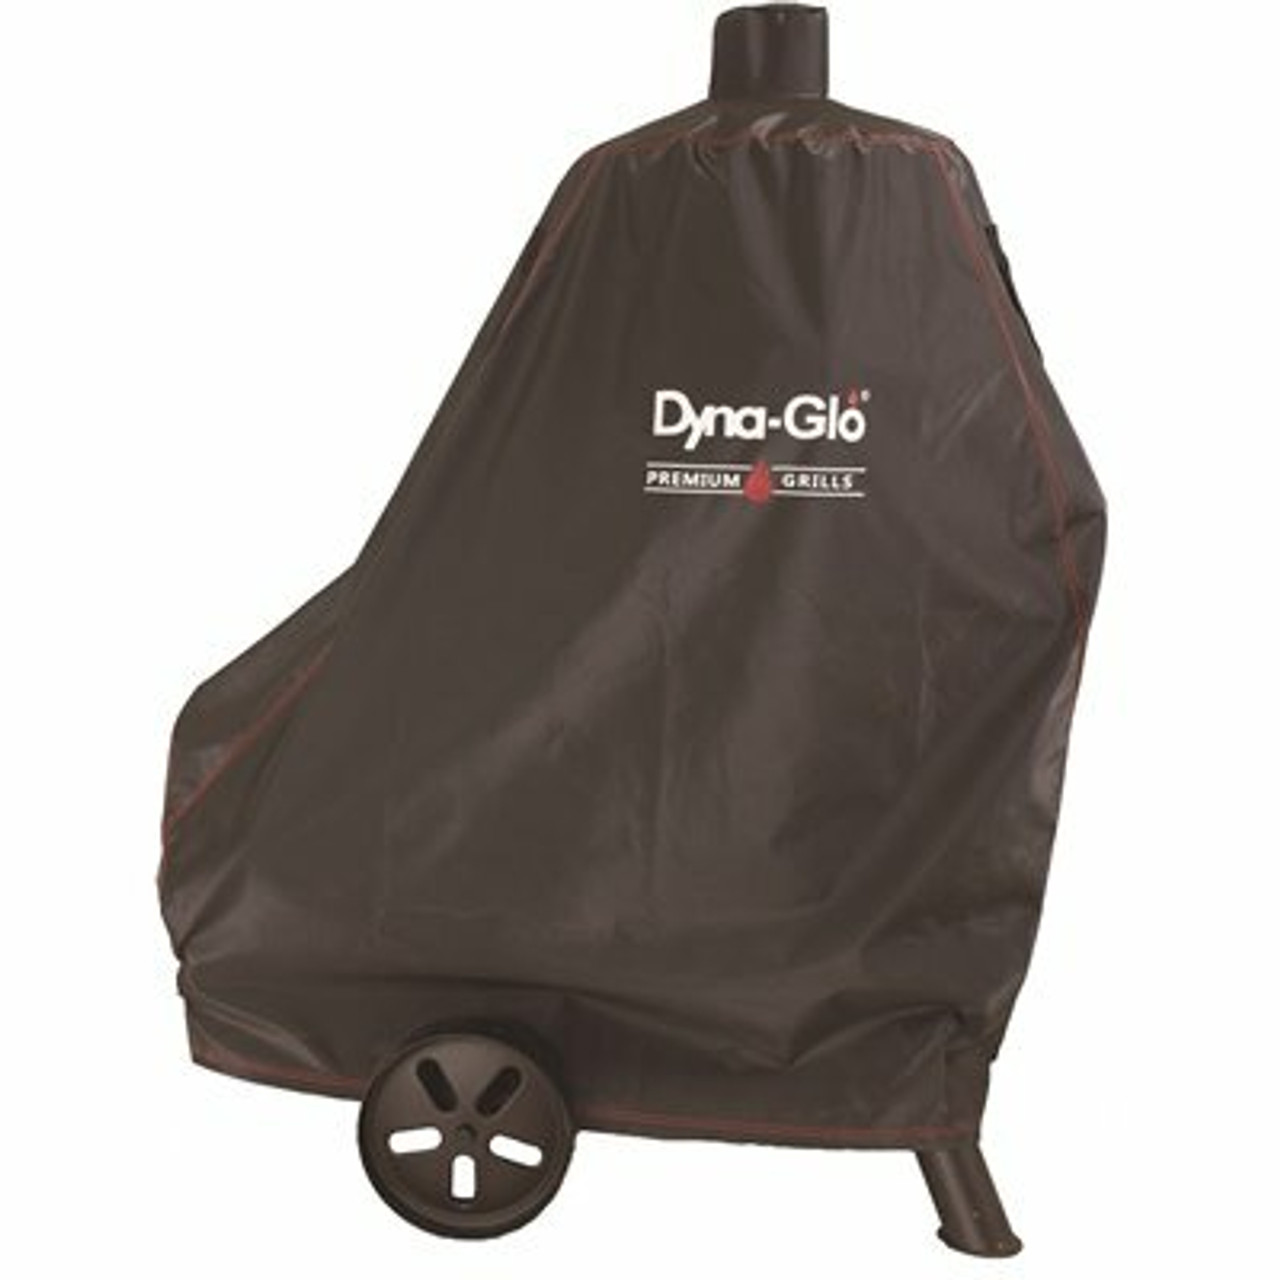 Dyna-Glo 46 In. Premium Vertical Offset Charcoal Smoker Cover